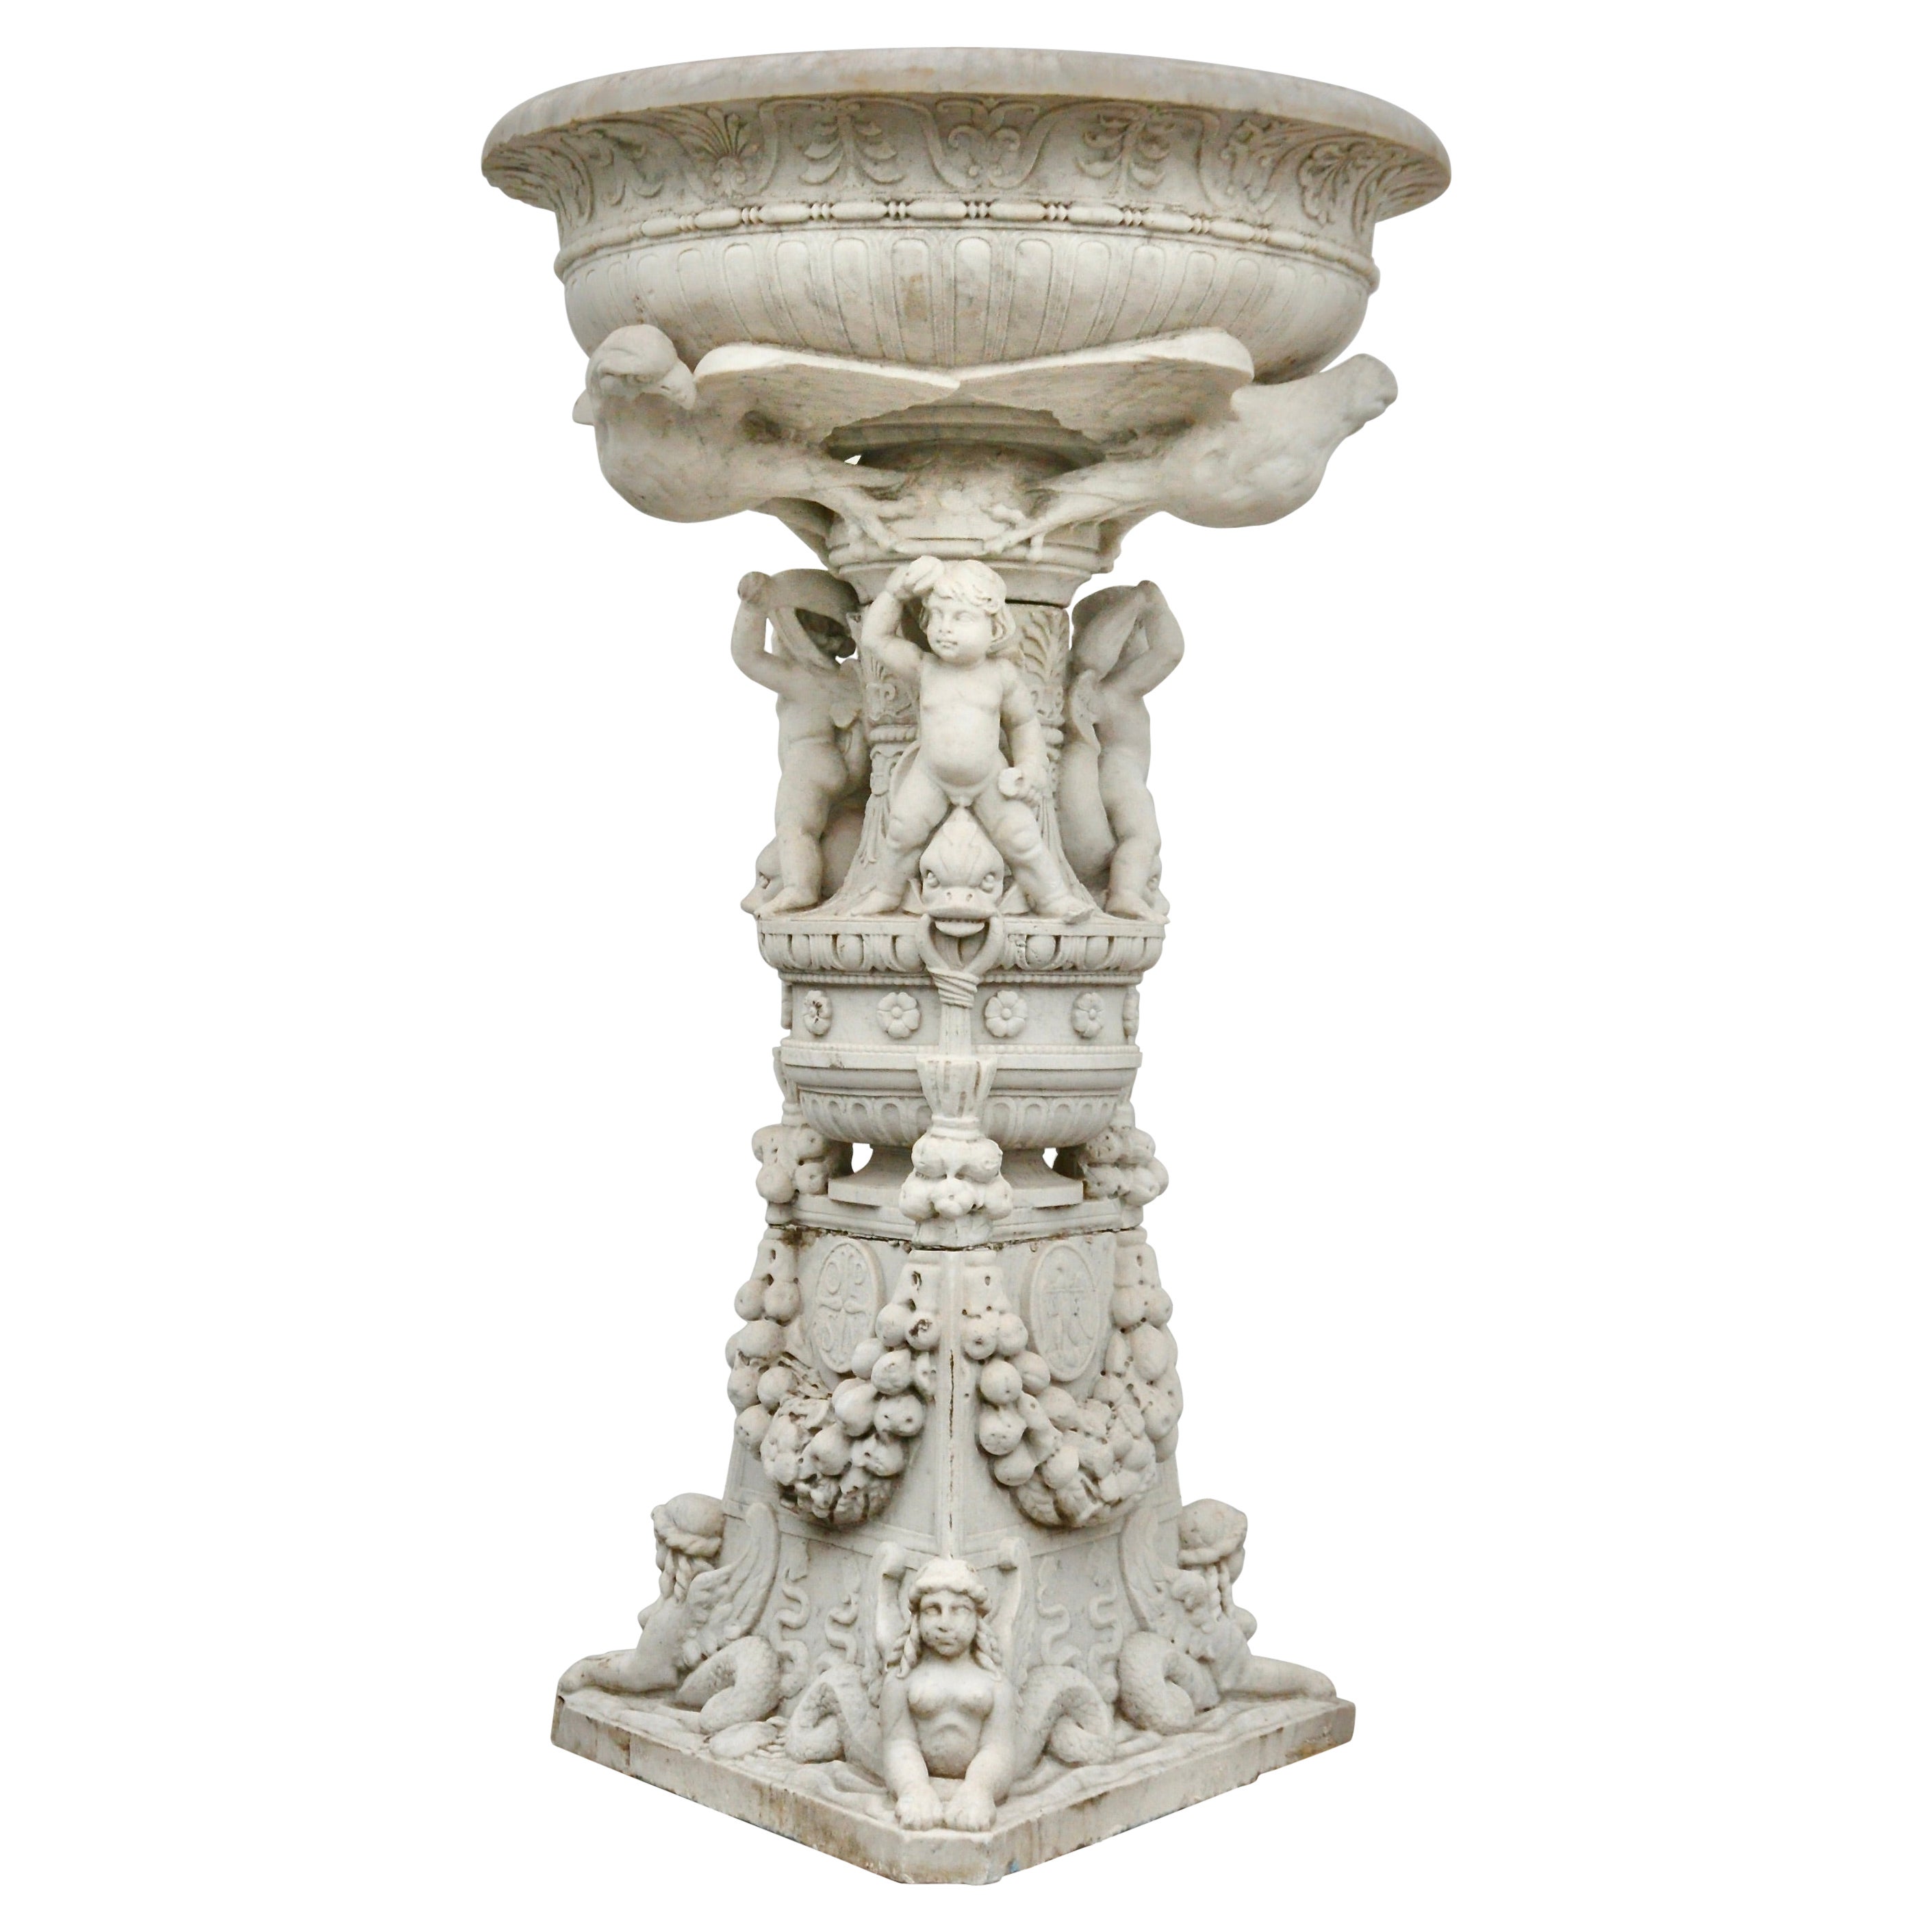 Late 19th Century Carved Marble Fountain by Edward F. Caldwell & Co.